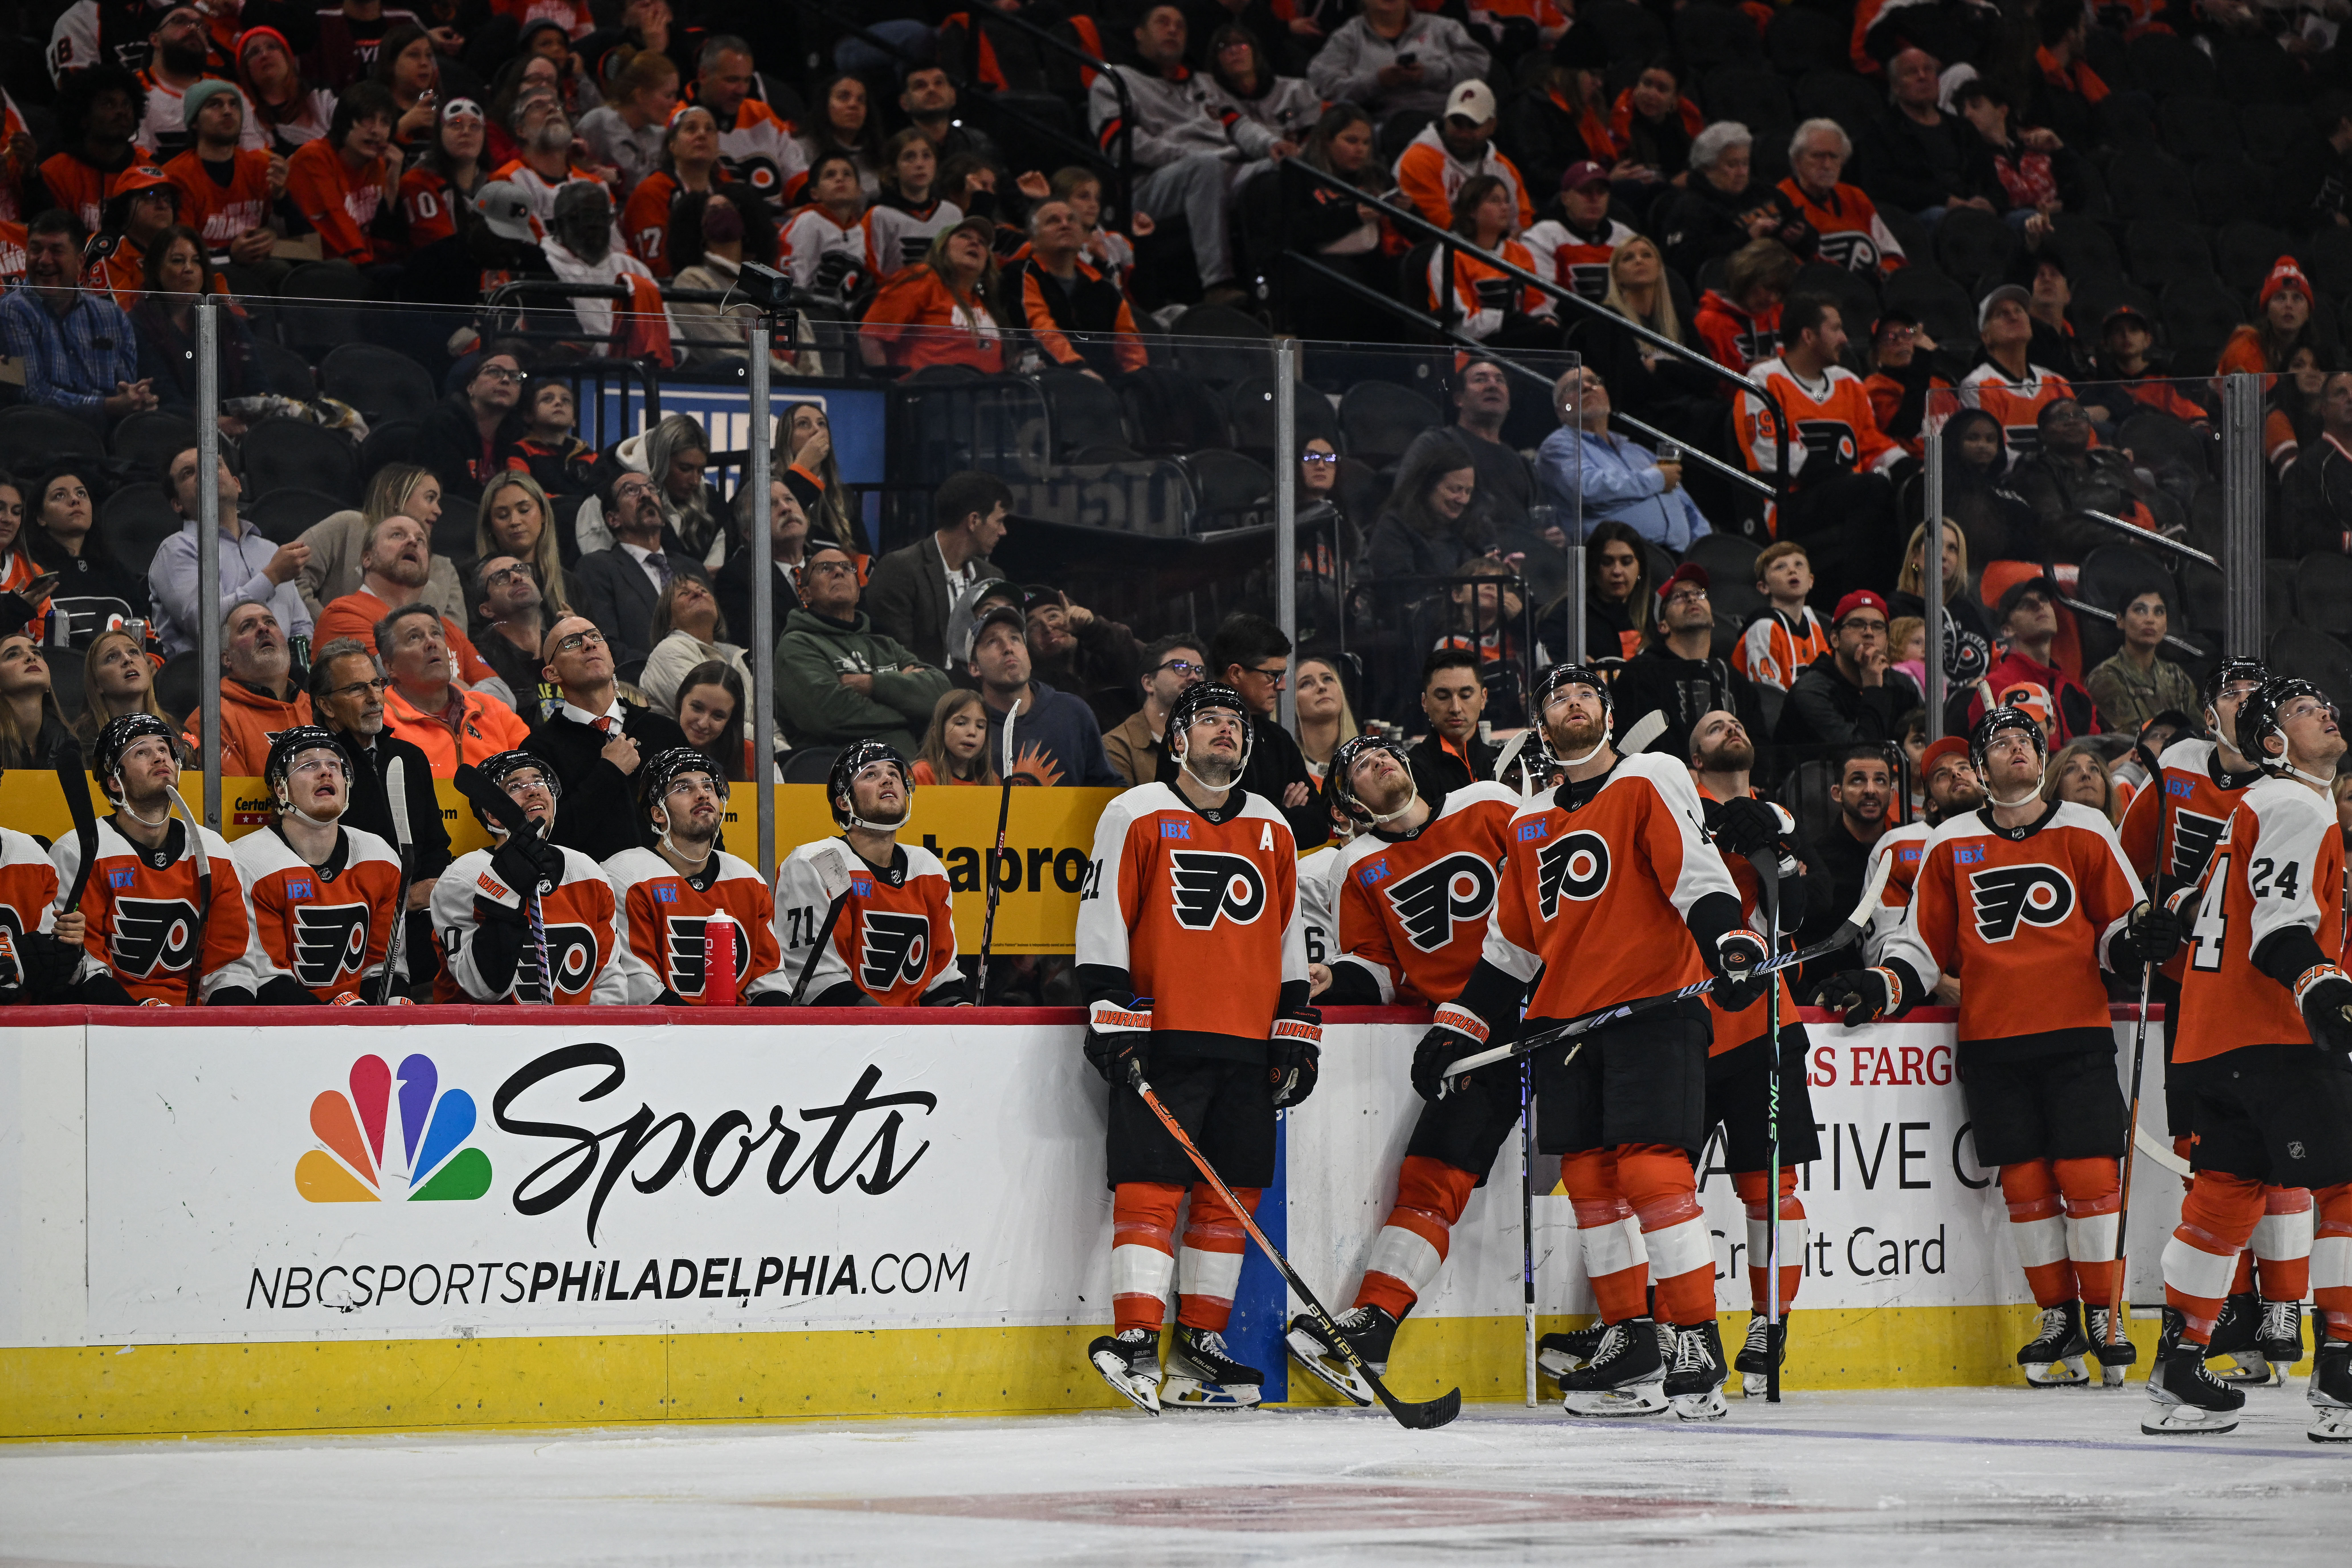 FLYERS OPEN AT JACKETS OCT 12, HOME OCT 17 VS CANUCKS